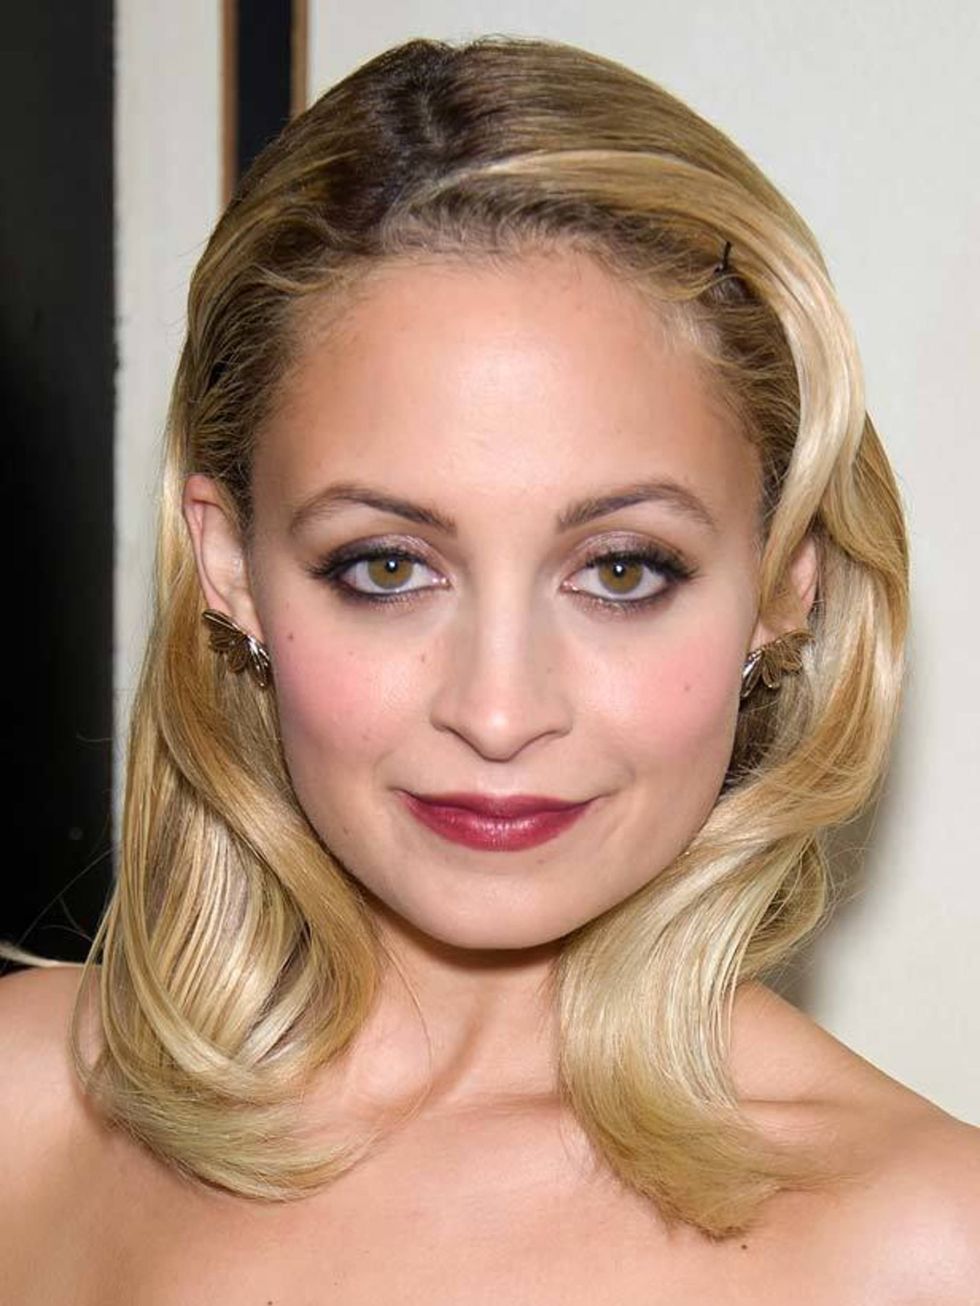 <p><a href="http://www.elleuk.com/starstyle/style-files/(section)/nicole-richie">Nicole Richie</a>, New York Fashion Week party, February 2011</p>